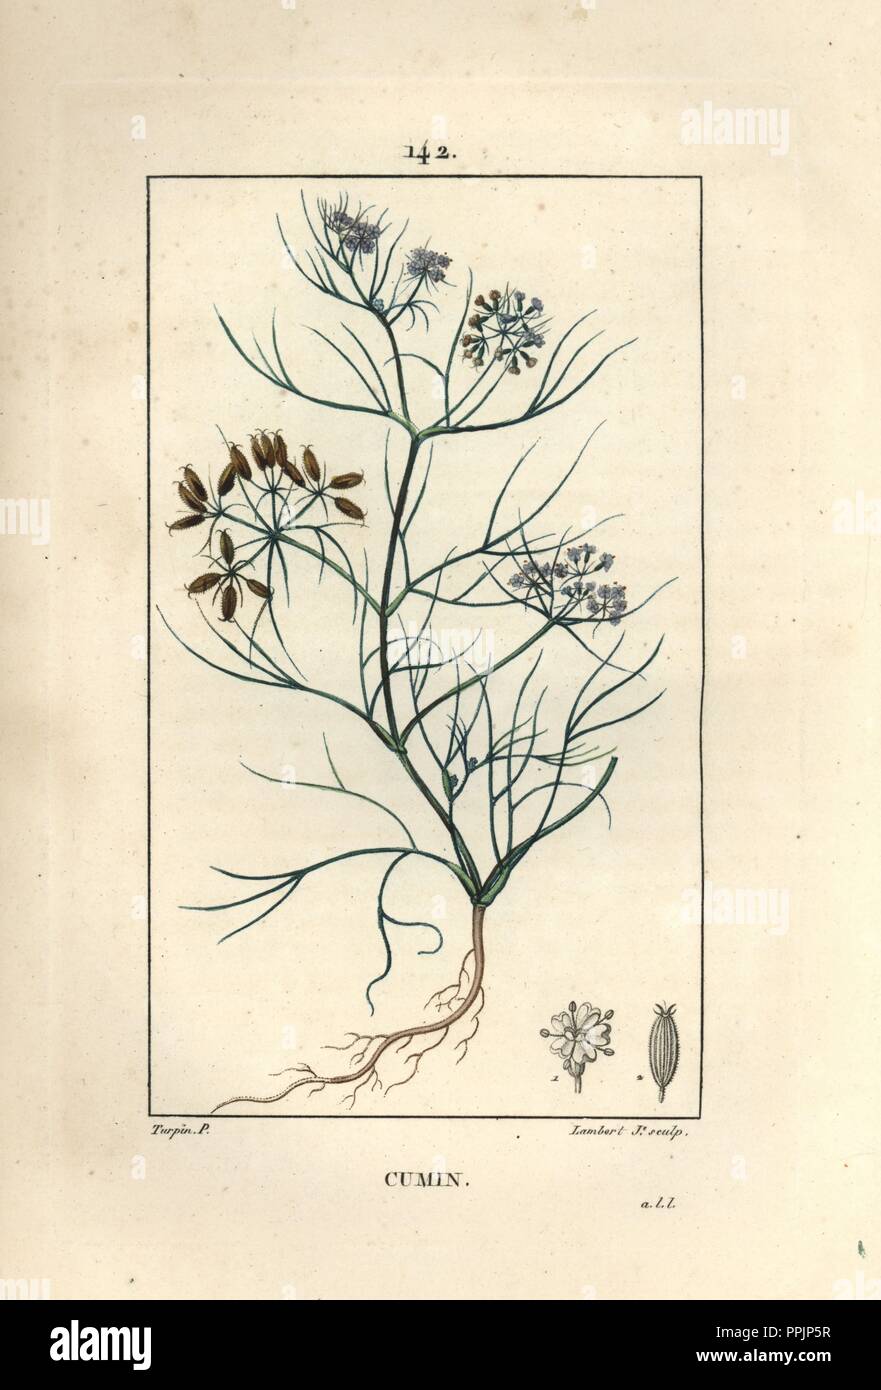 Cumin, Cuminum cyminum, showing flower, leaf, root and seed. Handcoloured stipple copperplate engraving by Lambert Junior from a drawing by Pierre Jean-Francois Turpin from Chaumeton, Poiret et Chamberet's 'La Flore Medicale,' Paris, Panckoucke, 1830. Turpin (17751840) was one of the three giants of French botanical art of the era alongside Pierre Joseph Redoute and Pancrace Bessa. Stock Photo